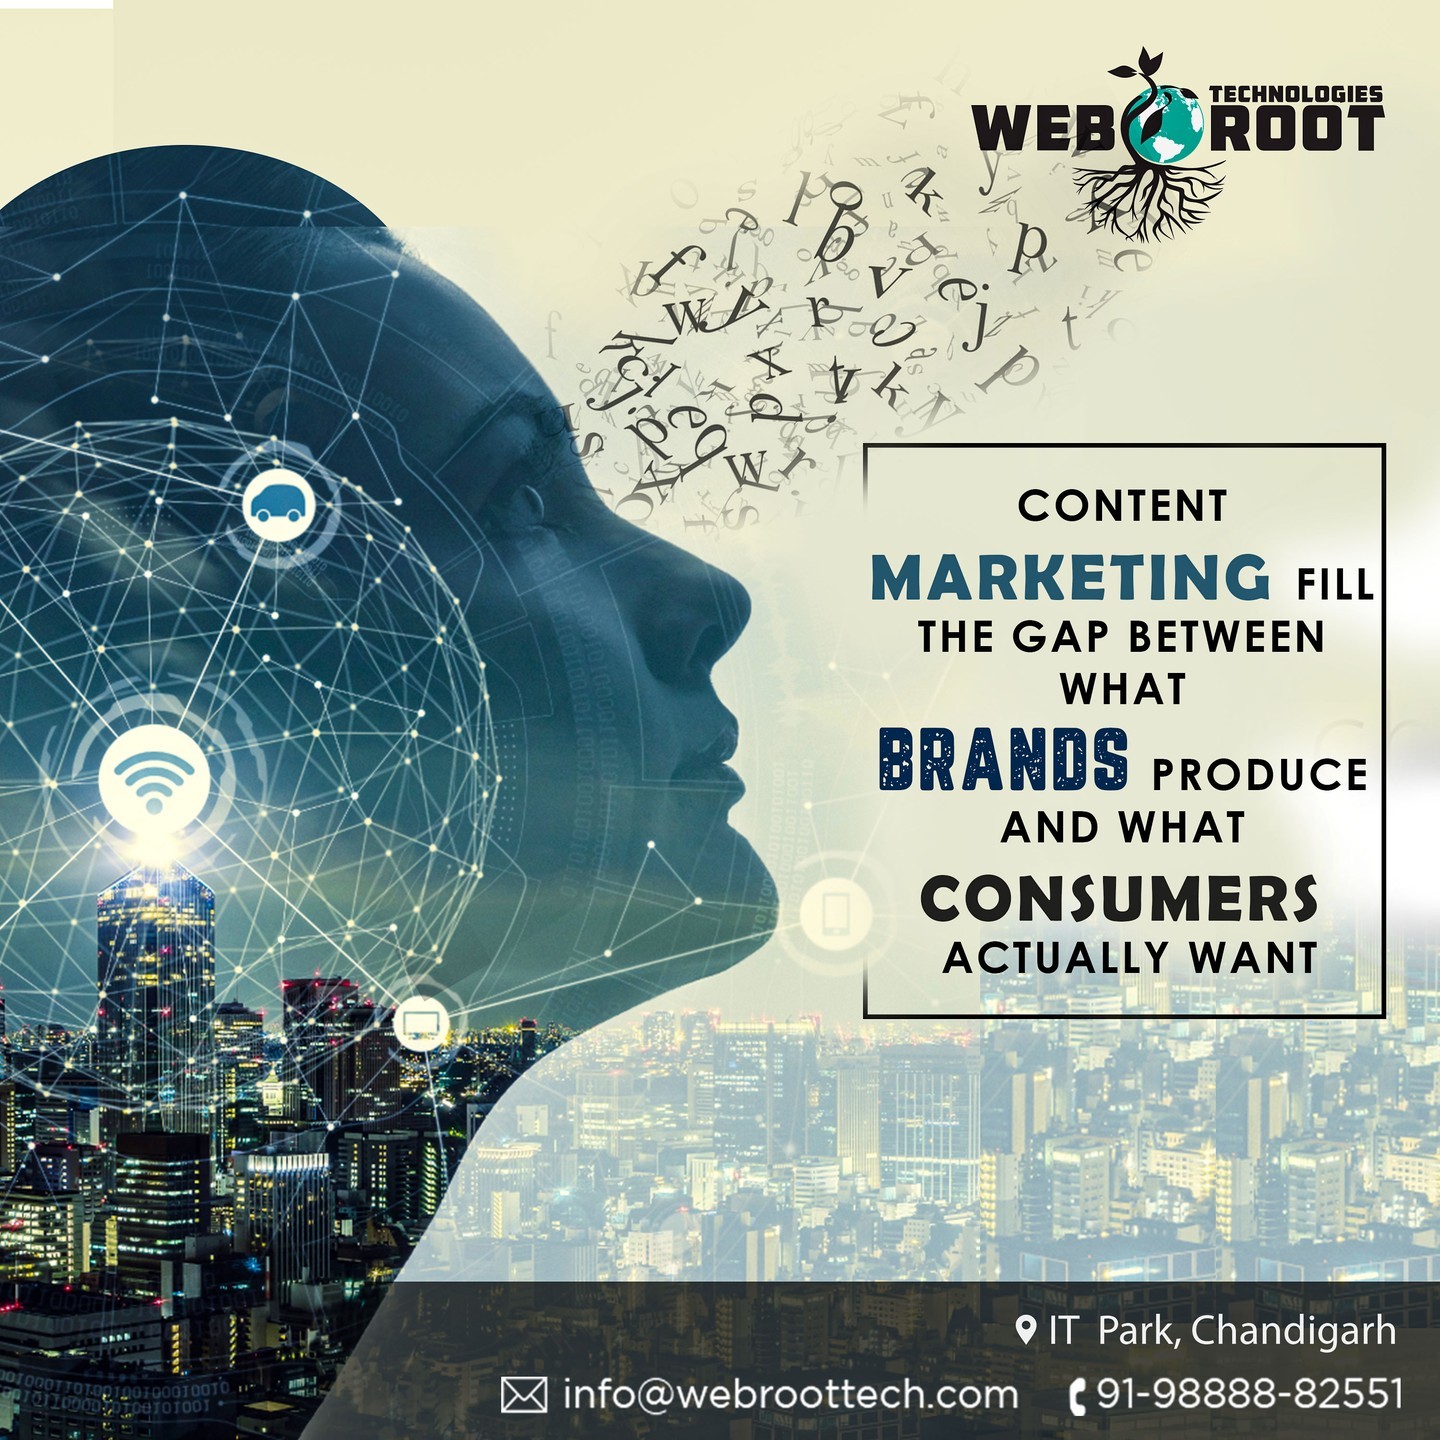 Content Marketing fills the gap between what brands produce and what consumer actually wants.

Webroot Technologies' content writing team is a writing powerhouse that creates content that resonates with customers and ultimately drives them to your business.

Get a Quote!
Contact Us:⠀⠀⠀⠀
📞 9888882551⠀⠀⠀⠀
Website: info@webroottech.com⠀⠀⠀⠀
Website: https://buff.ly/3LcR0Tk

#contentmarketing #logotype #graphic #typography #startup #onlinemarketing #graphics  #instagood #marketingtips #branddesign  #logoinspiration #printing #logomaker #entrepreneurship #identity #logoinspirations  #branding #marketing #graphicdesign #design #logo #digitalmarketing #brand #business #socialmedia #advertising #socialmediamarketing